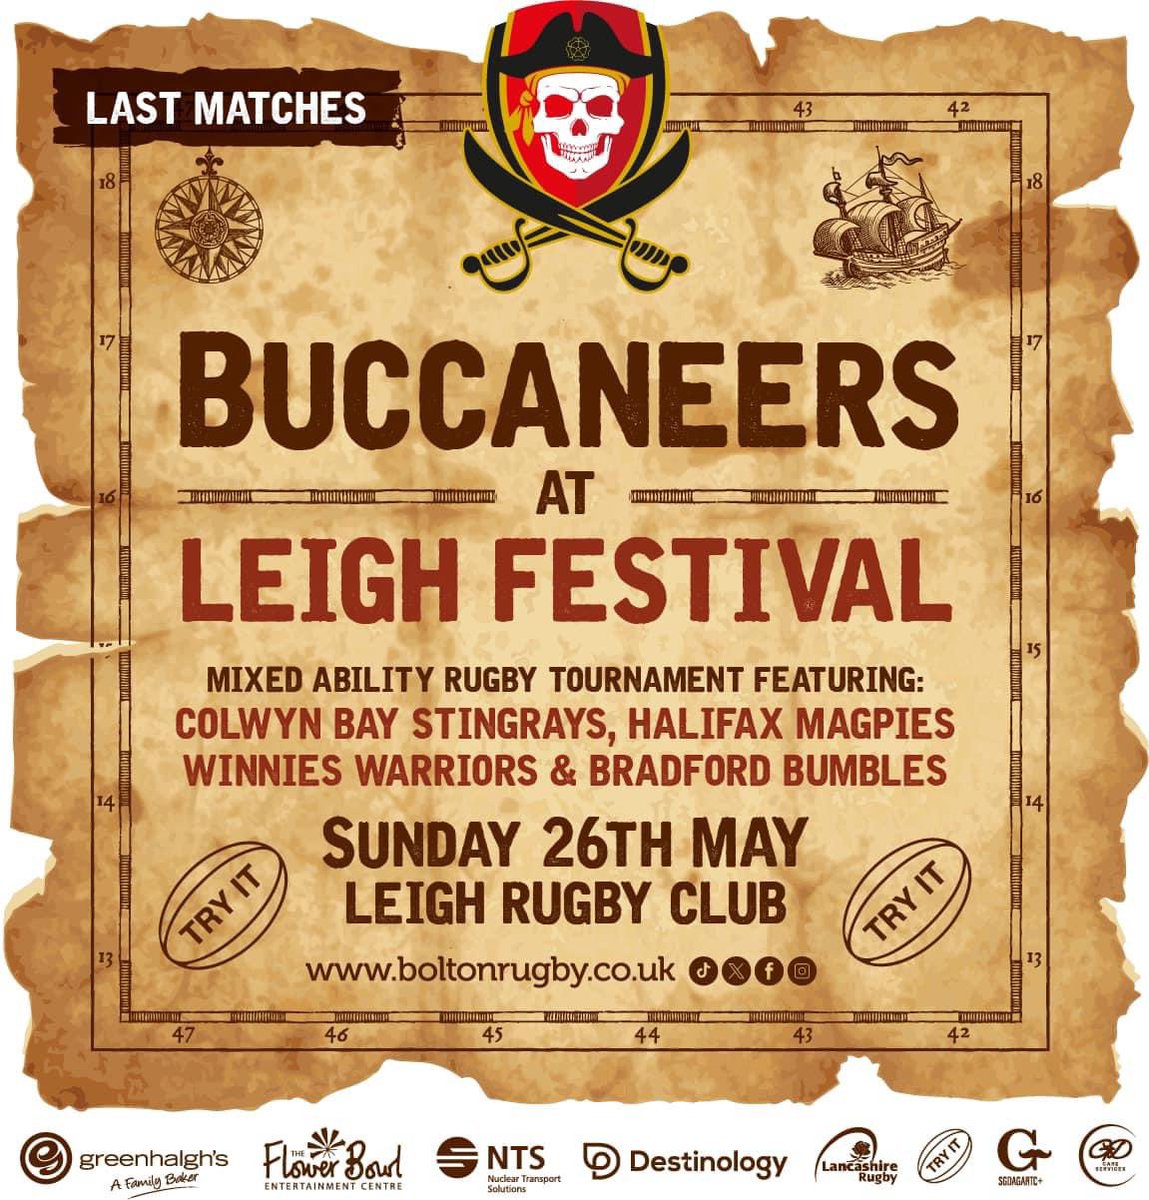 The Buccaneers finish off the season at Leigh Festival on Sun 26 May in what promises to be a celebration of #MARugby organised by @TryItrugby This is an end of season tournament featuring all our MA Rugby friends. We can’t wait - save the date & get down & support all the teams